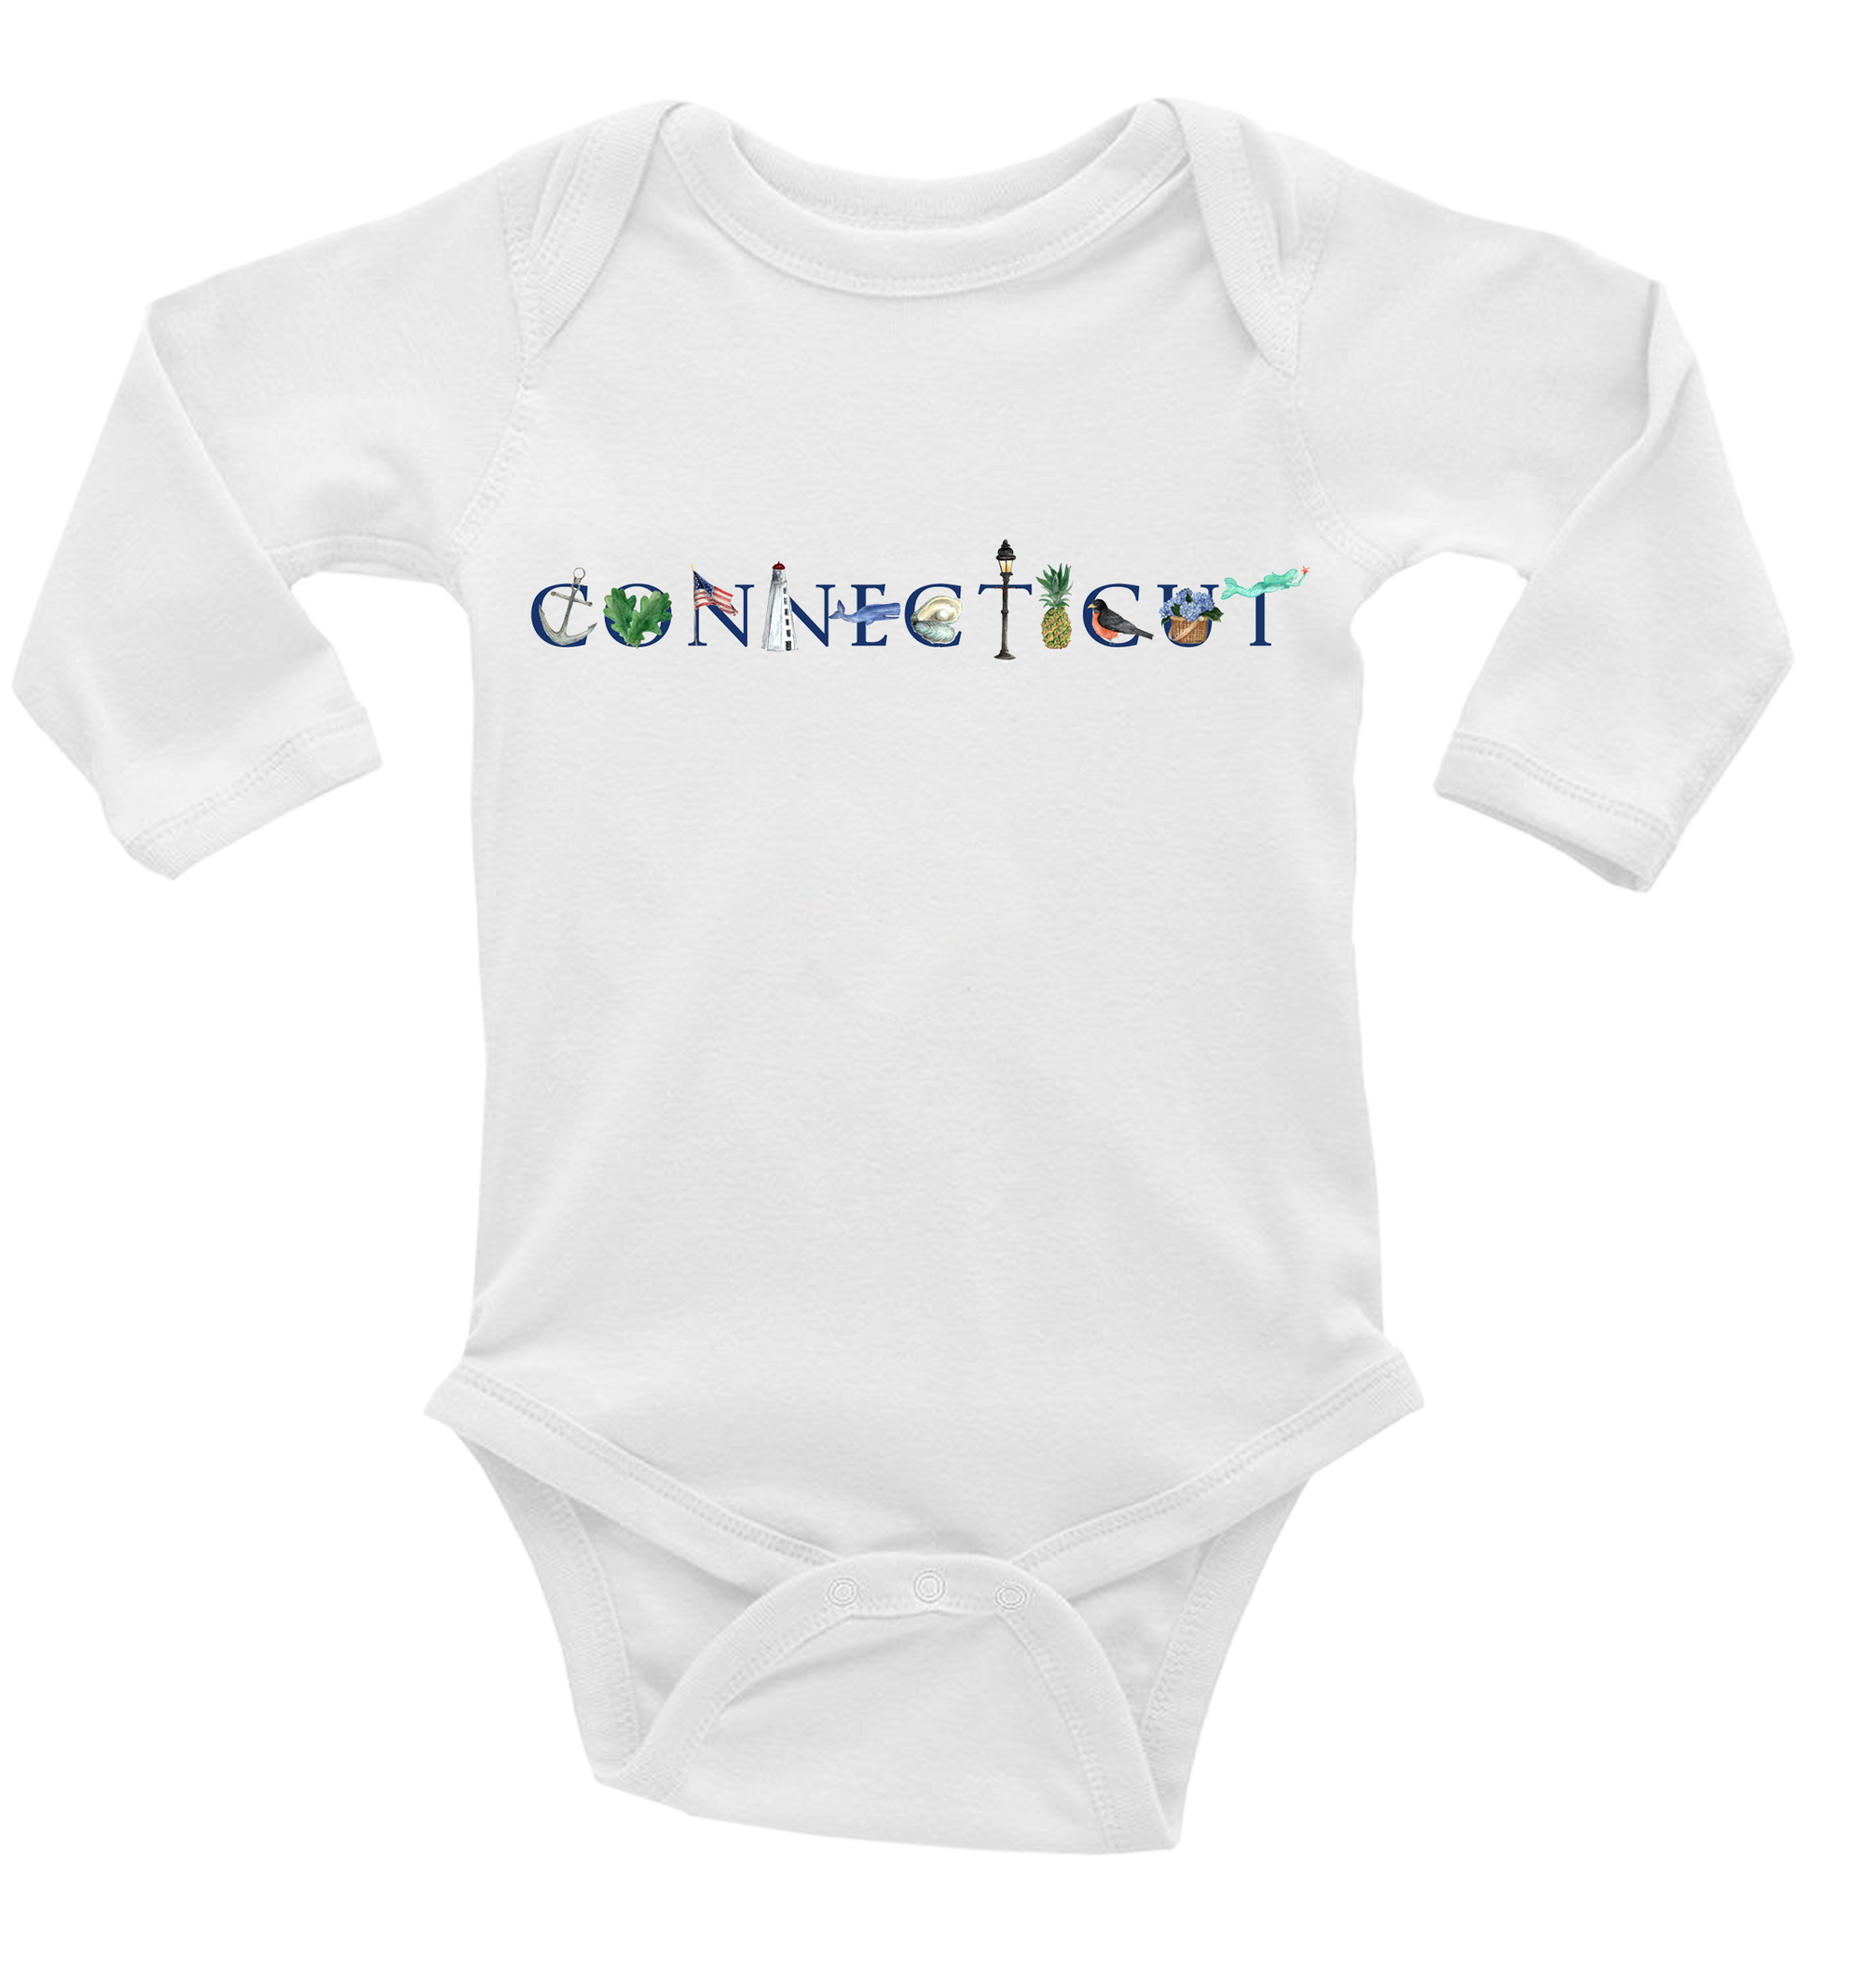 Connecticut baby snap up long sleeve